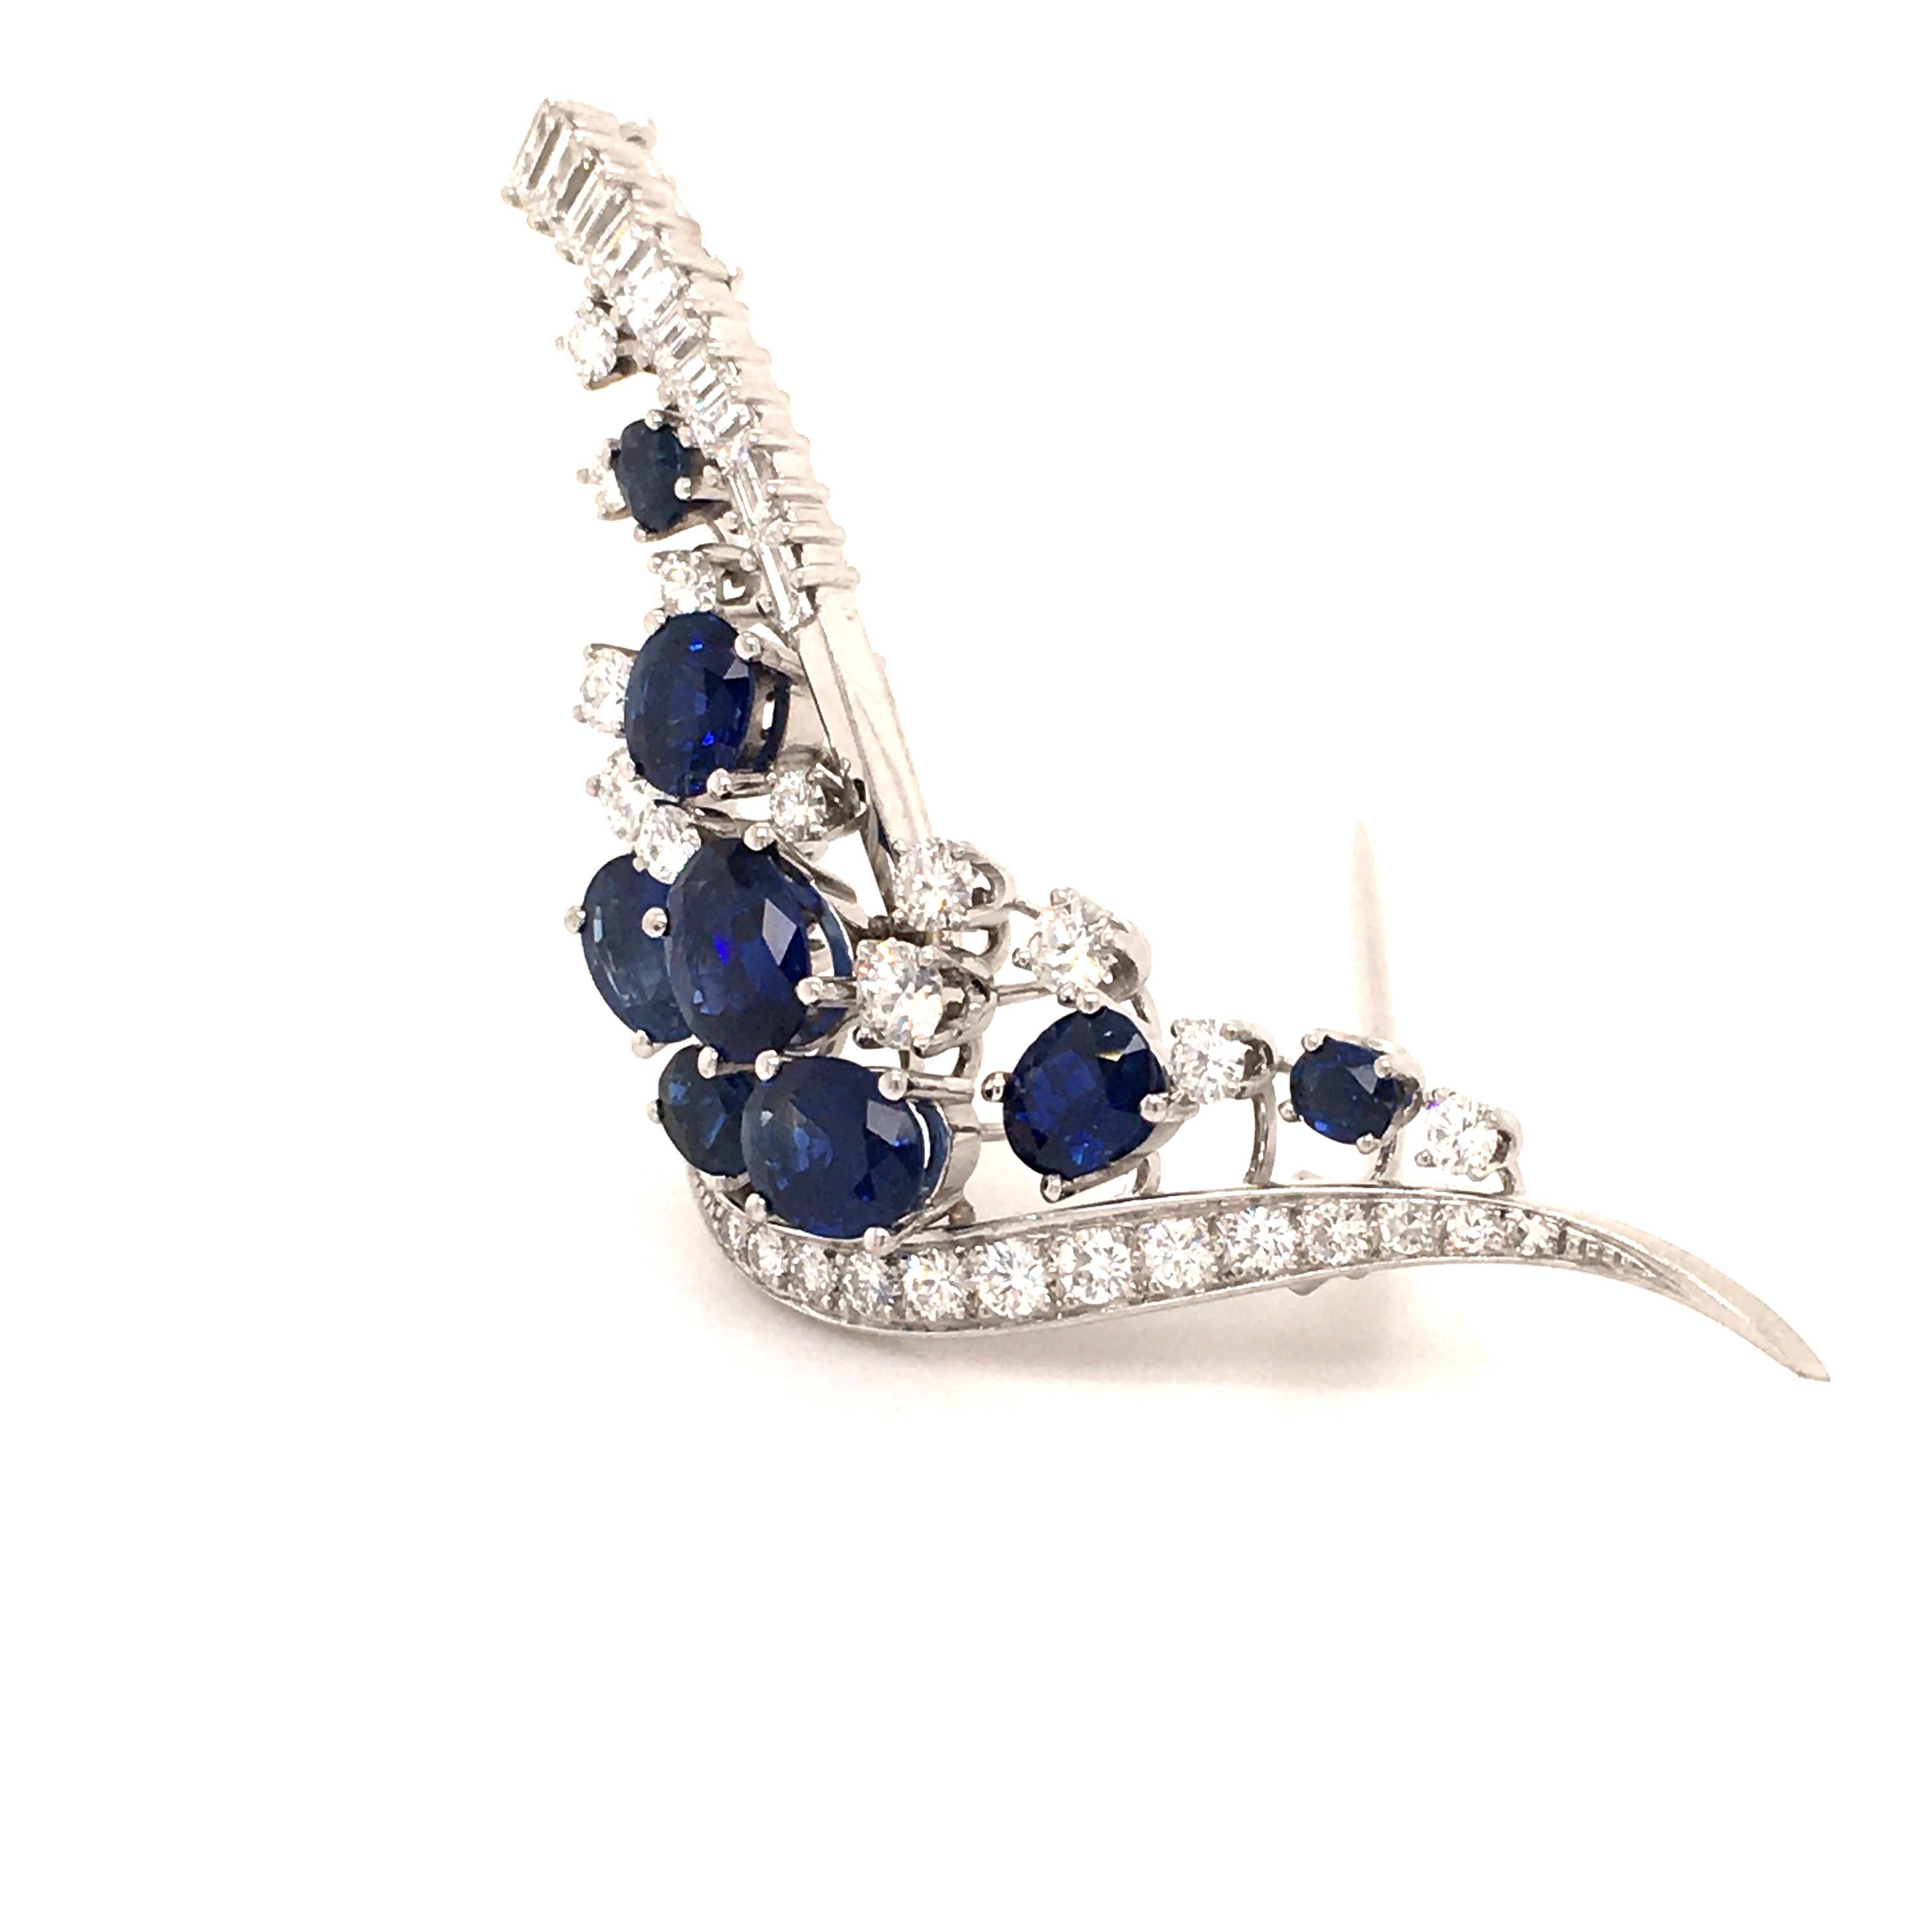 Oval Cut Sapphire and Diamond Brooch in 18 Karat White Gold